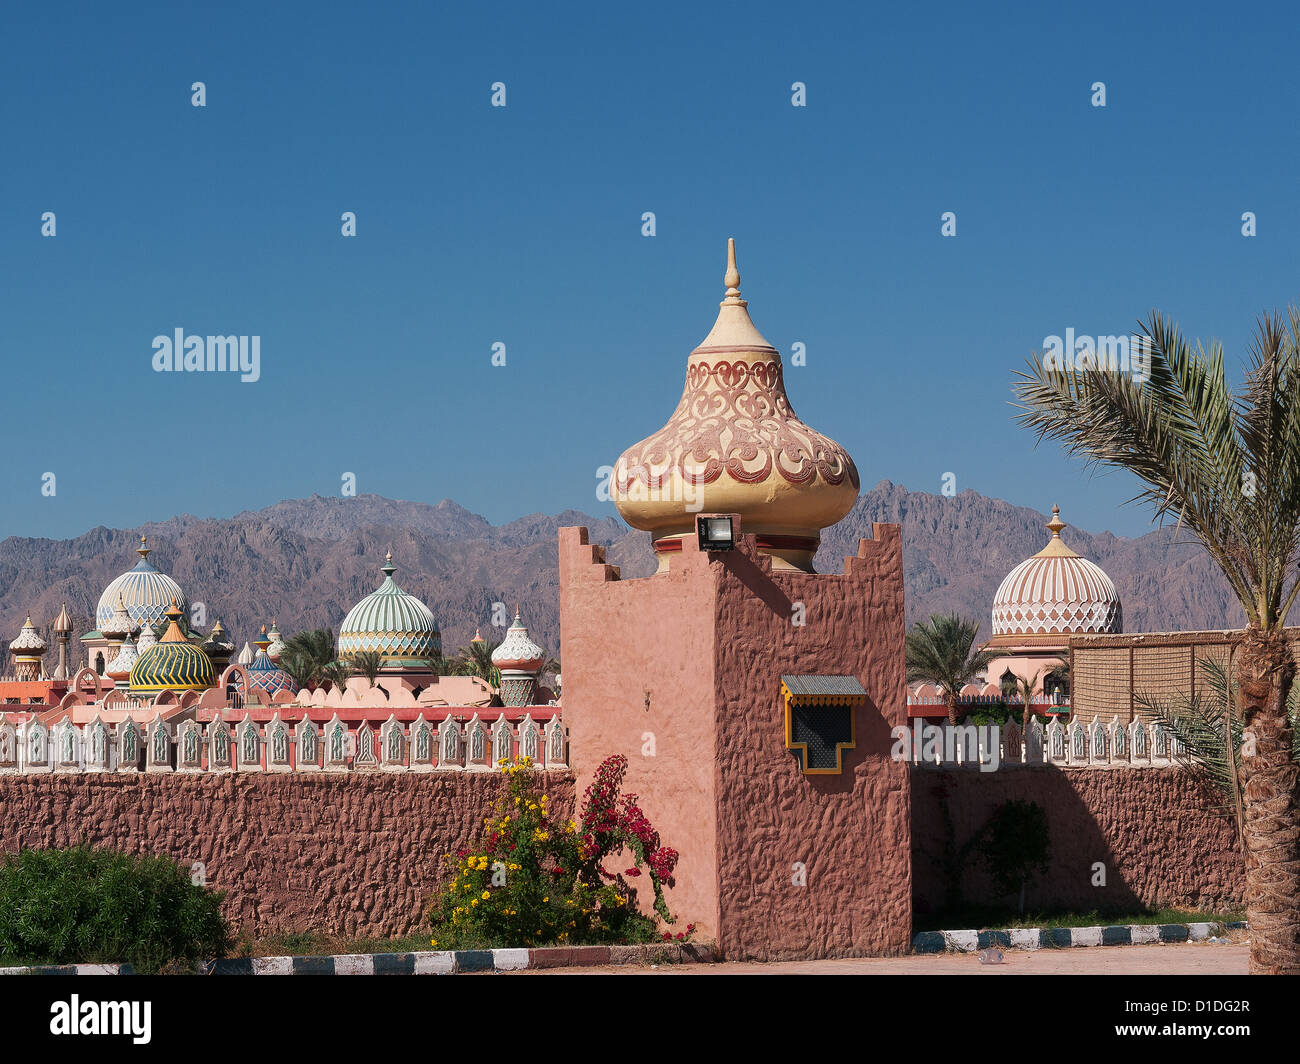 Minarets and the outer wall of Fantasia, Sharm El Sheikh, Egypt Stock Photo